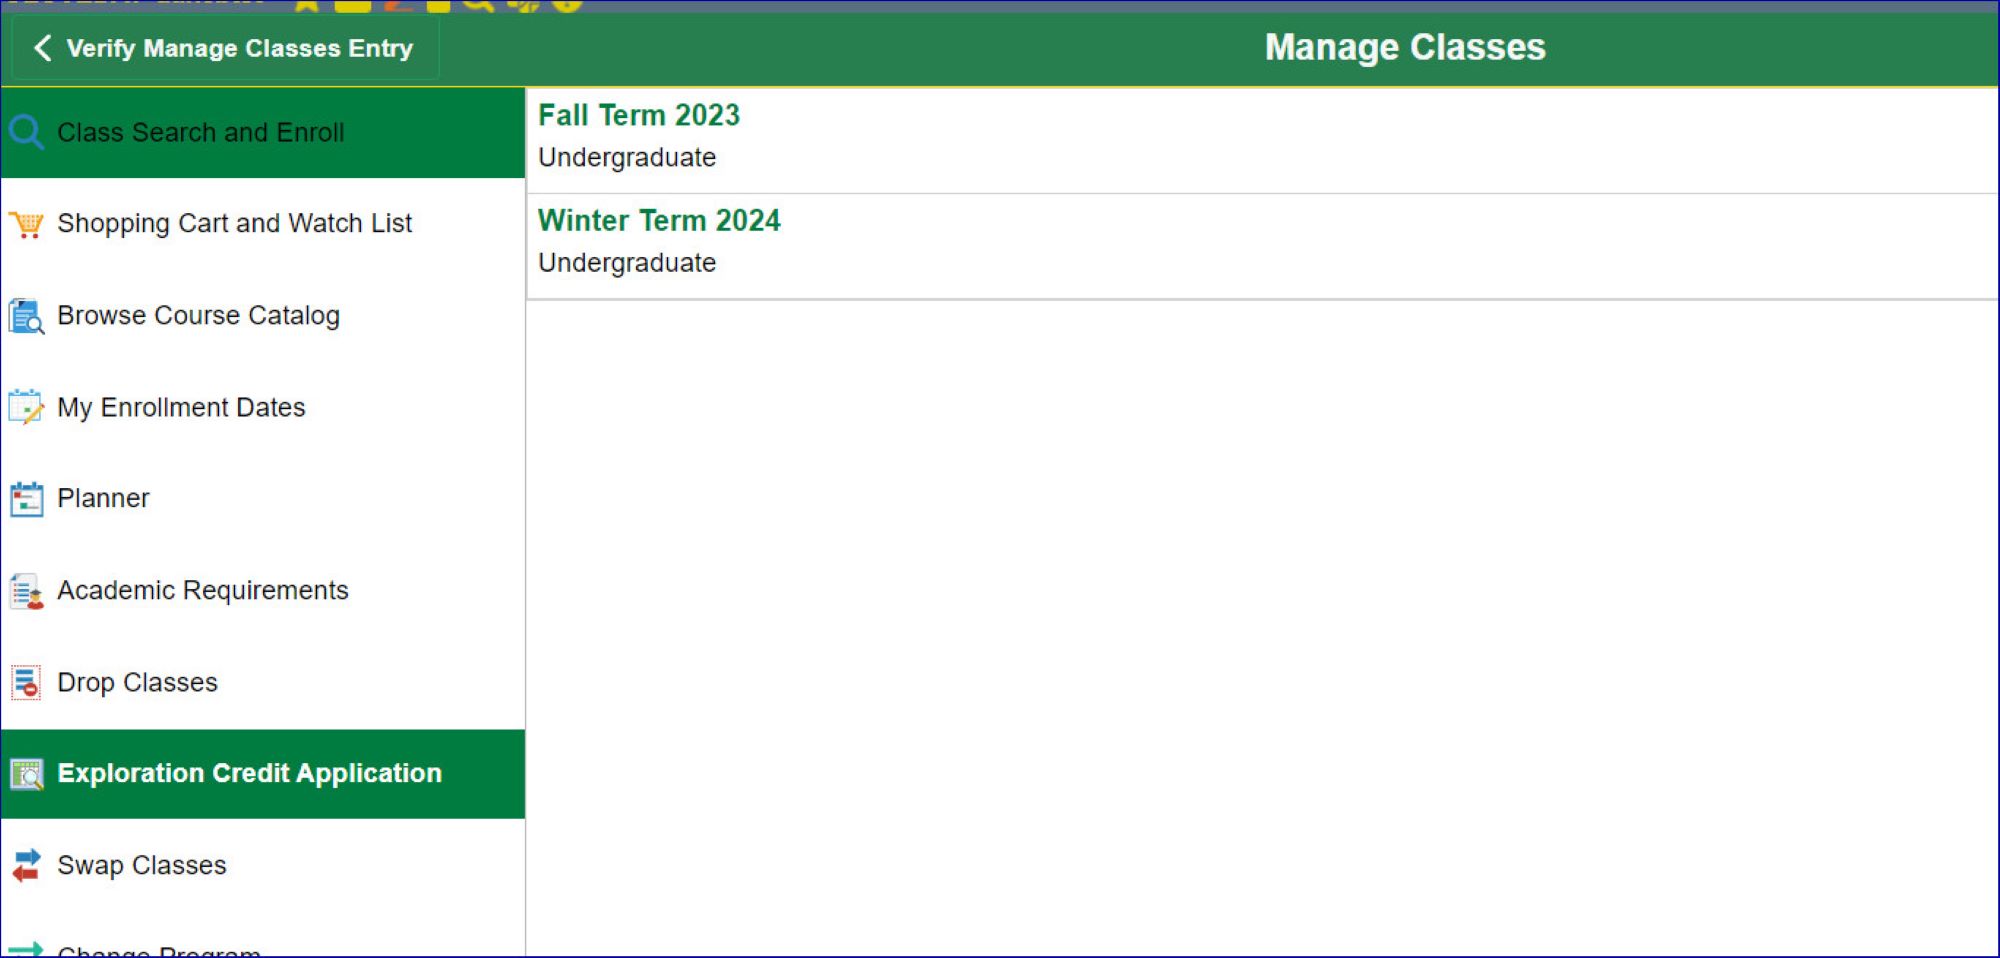 The Manage Classes screen on Bear Tracks, within the Exploration Credit Application section